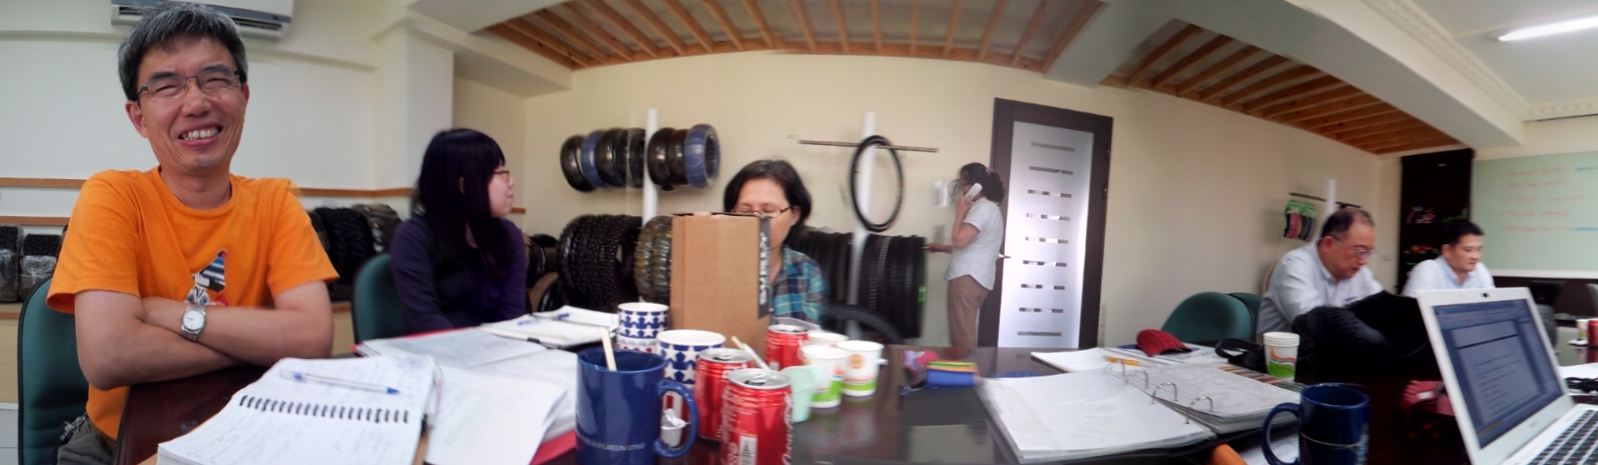 Three people sitting around a table, with notepads and beverages on it, in an office with bike tires in the background